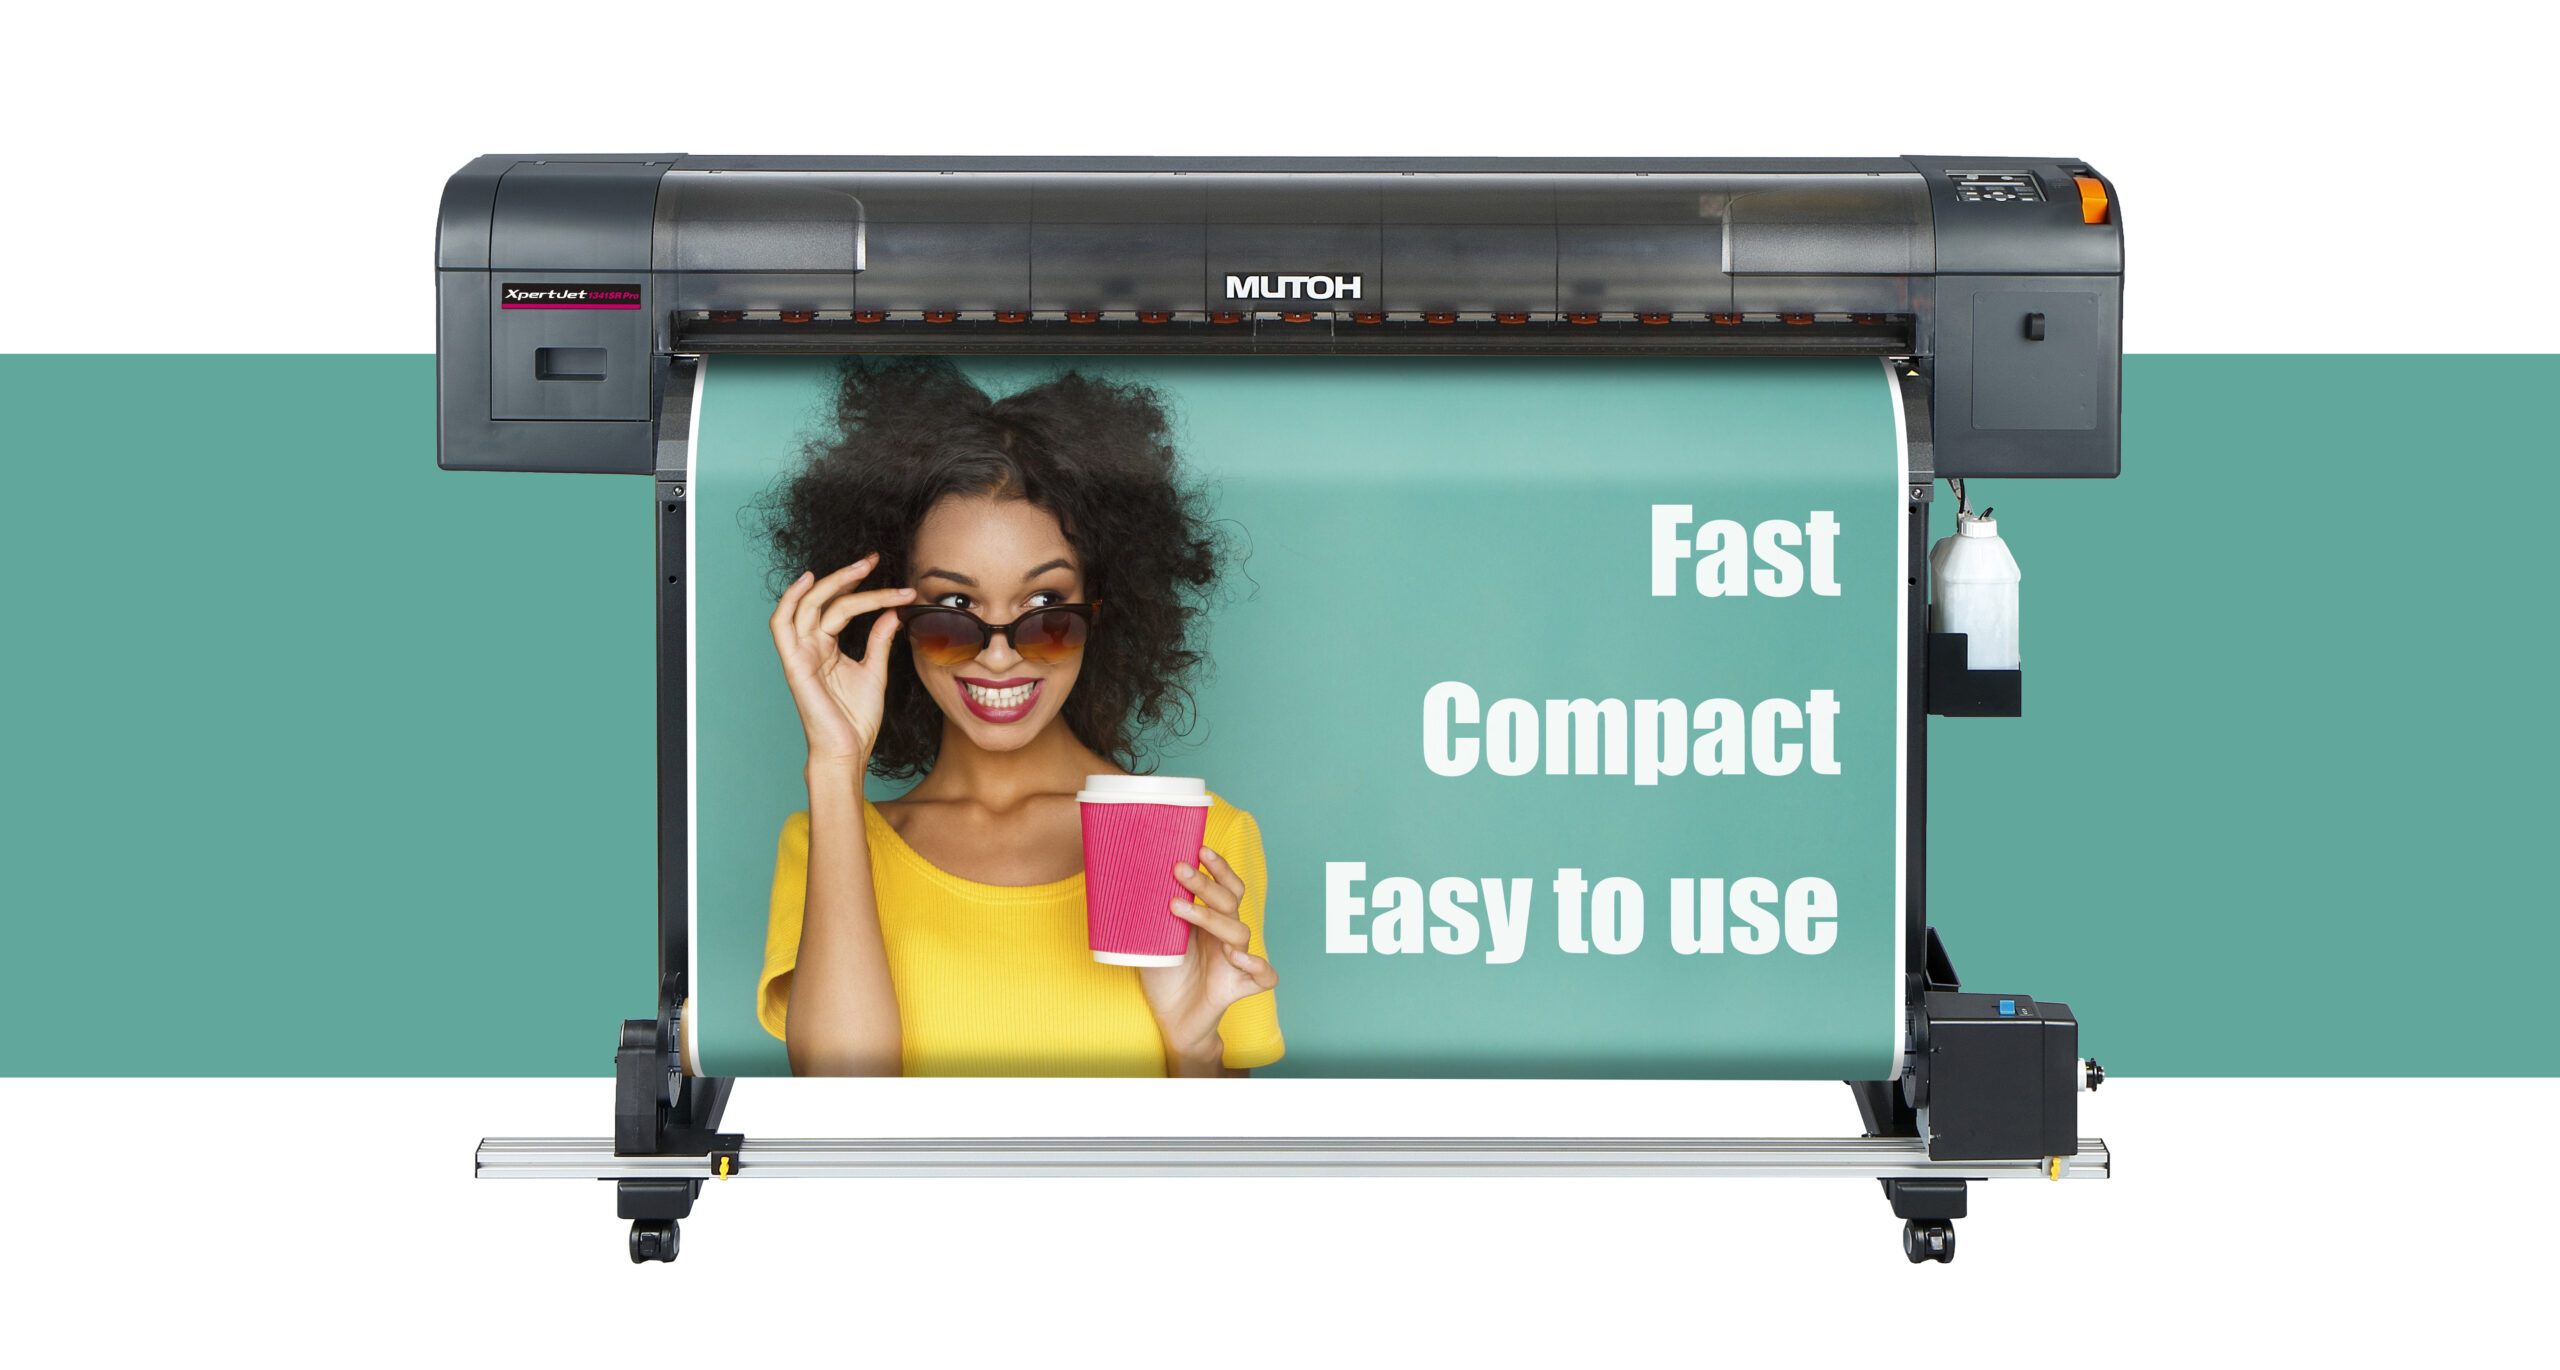 Mutoh launches XpertJet Pro series - Sprinter